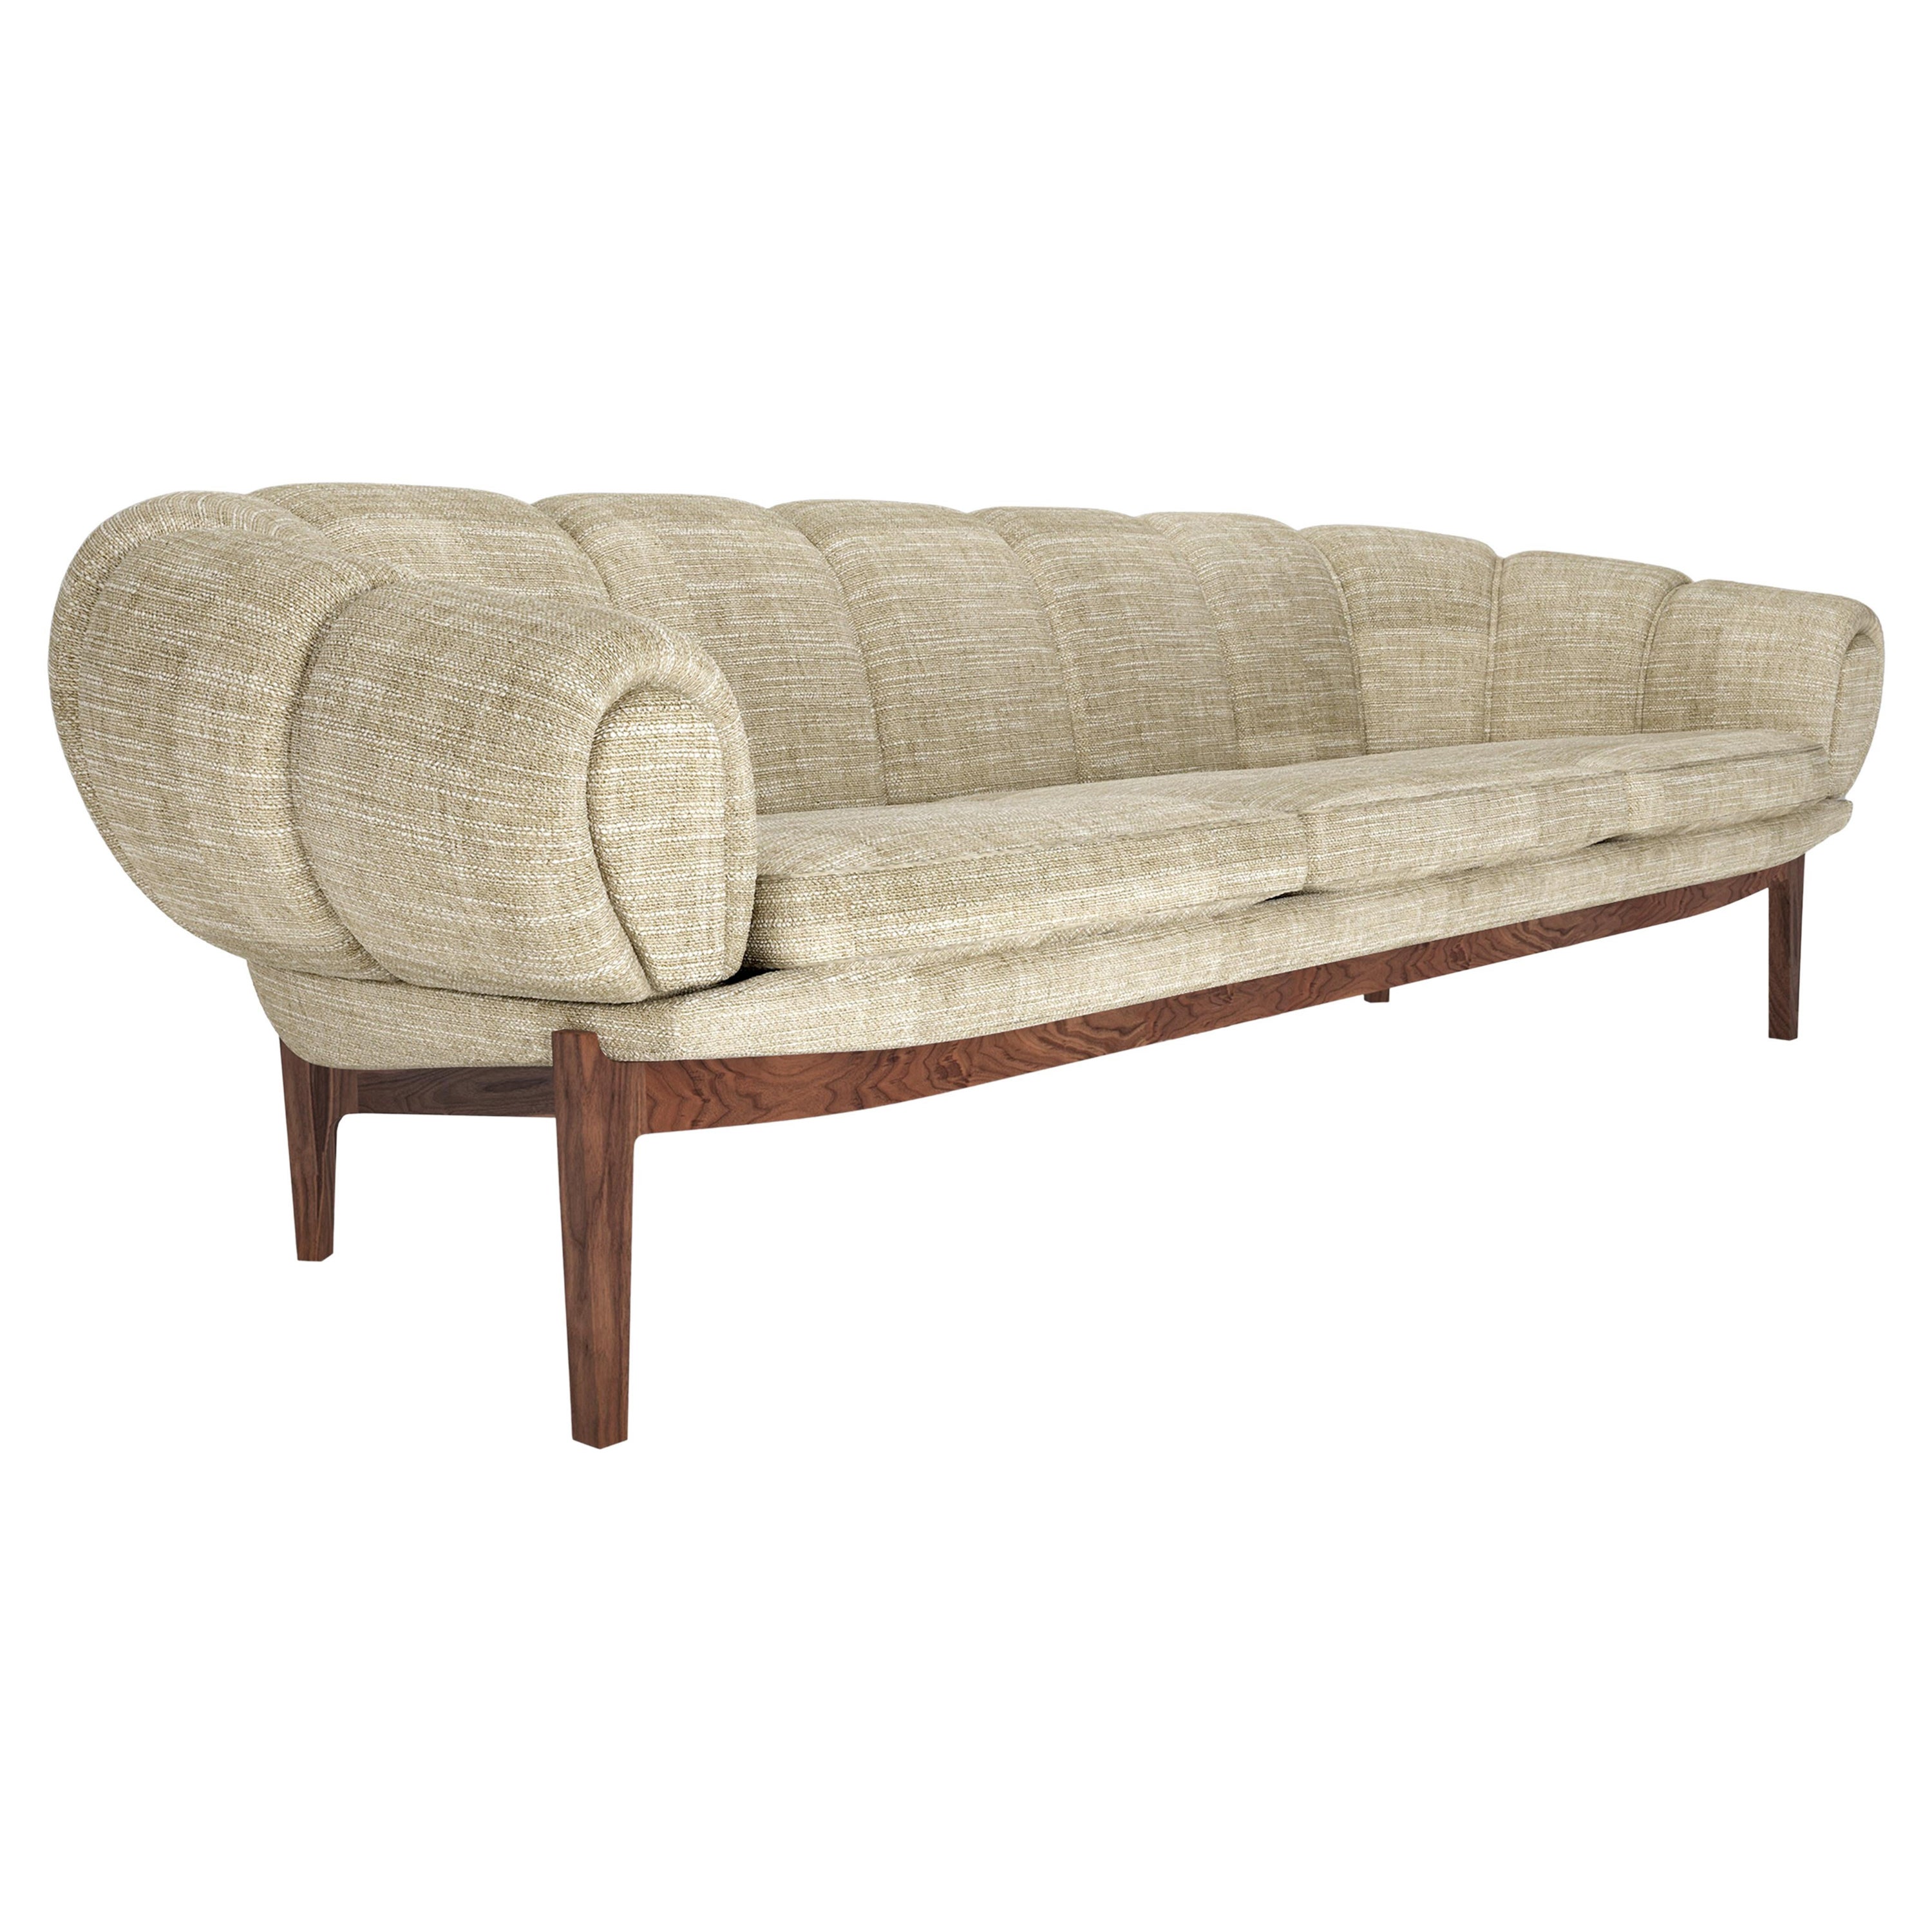 Fabric 'Croissant' Sofa by Illum Wikkelsø for GUBI with Walnut Legs For Sale